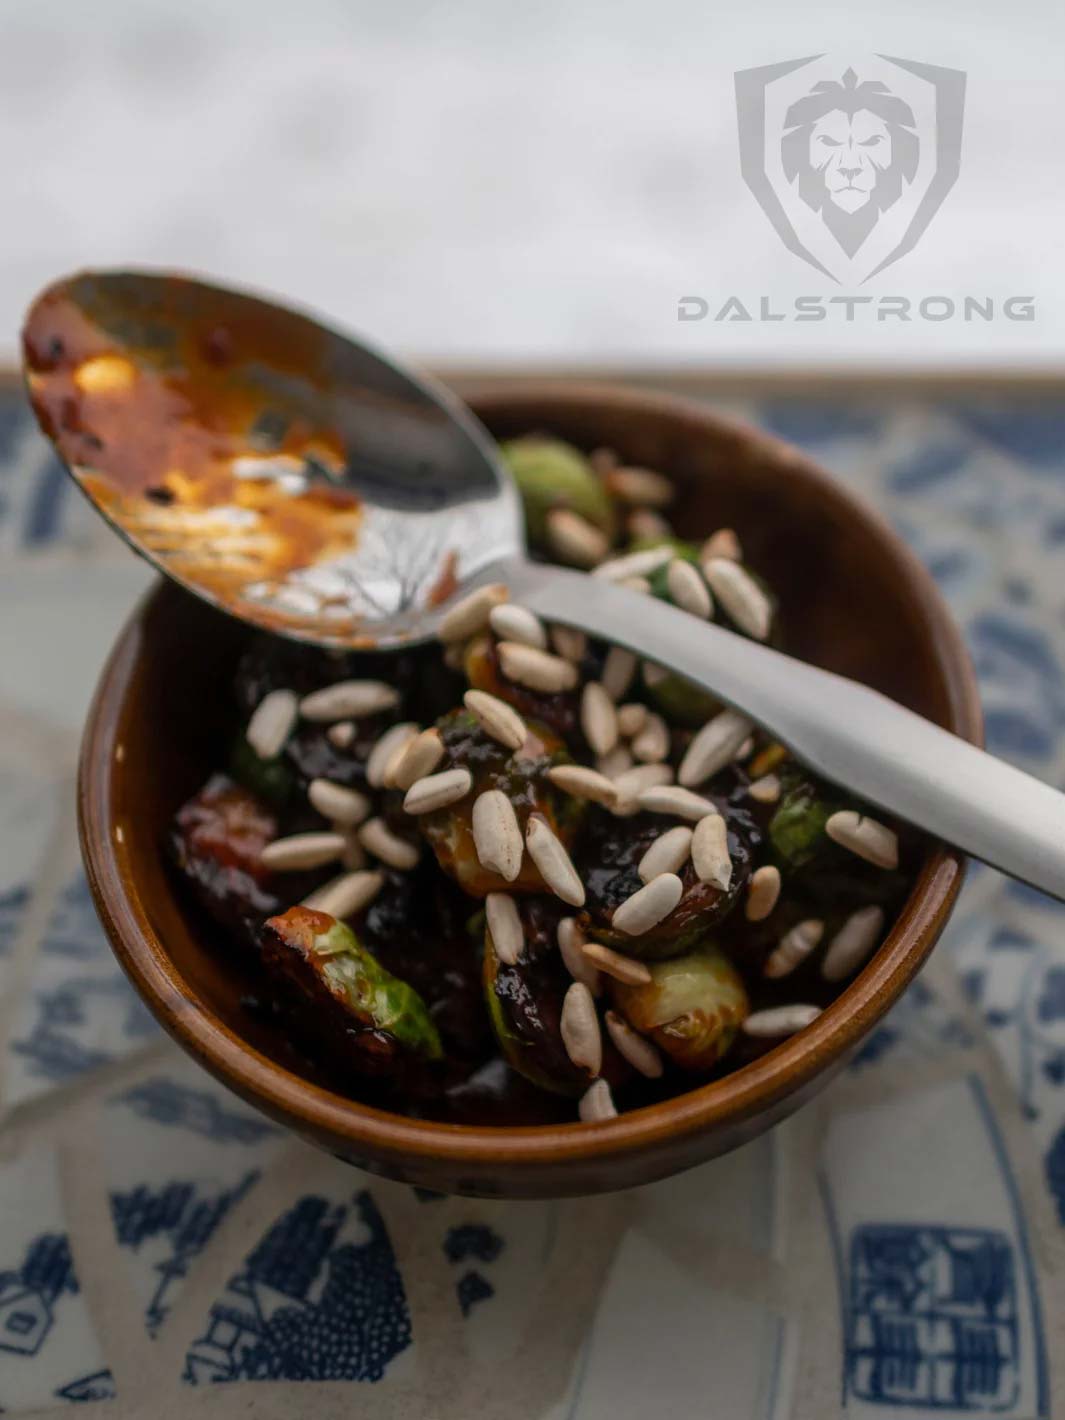 Dalstrong professional chef tasting and plating spoon on top of a bowl filled with cooked brussel sprouts.